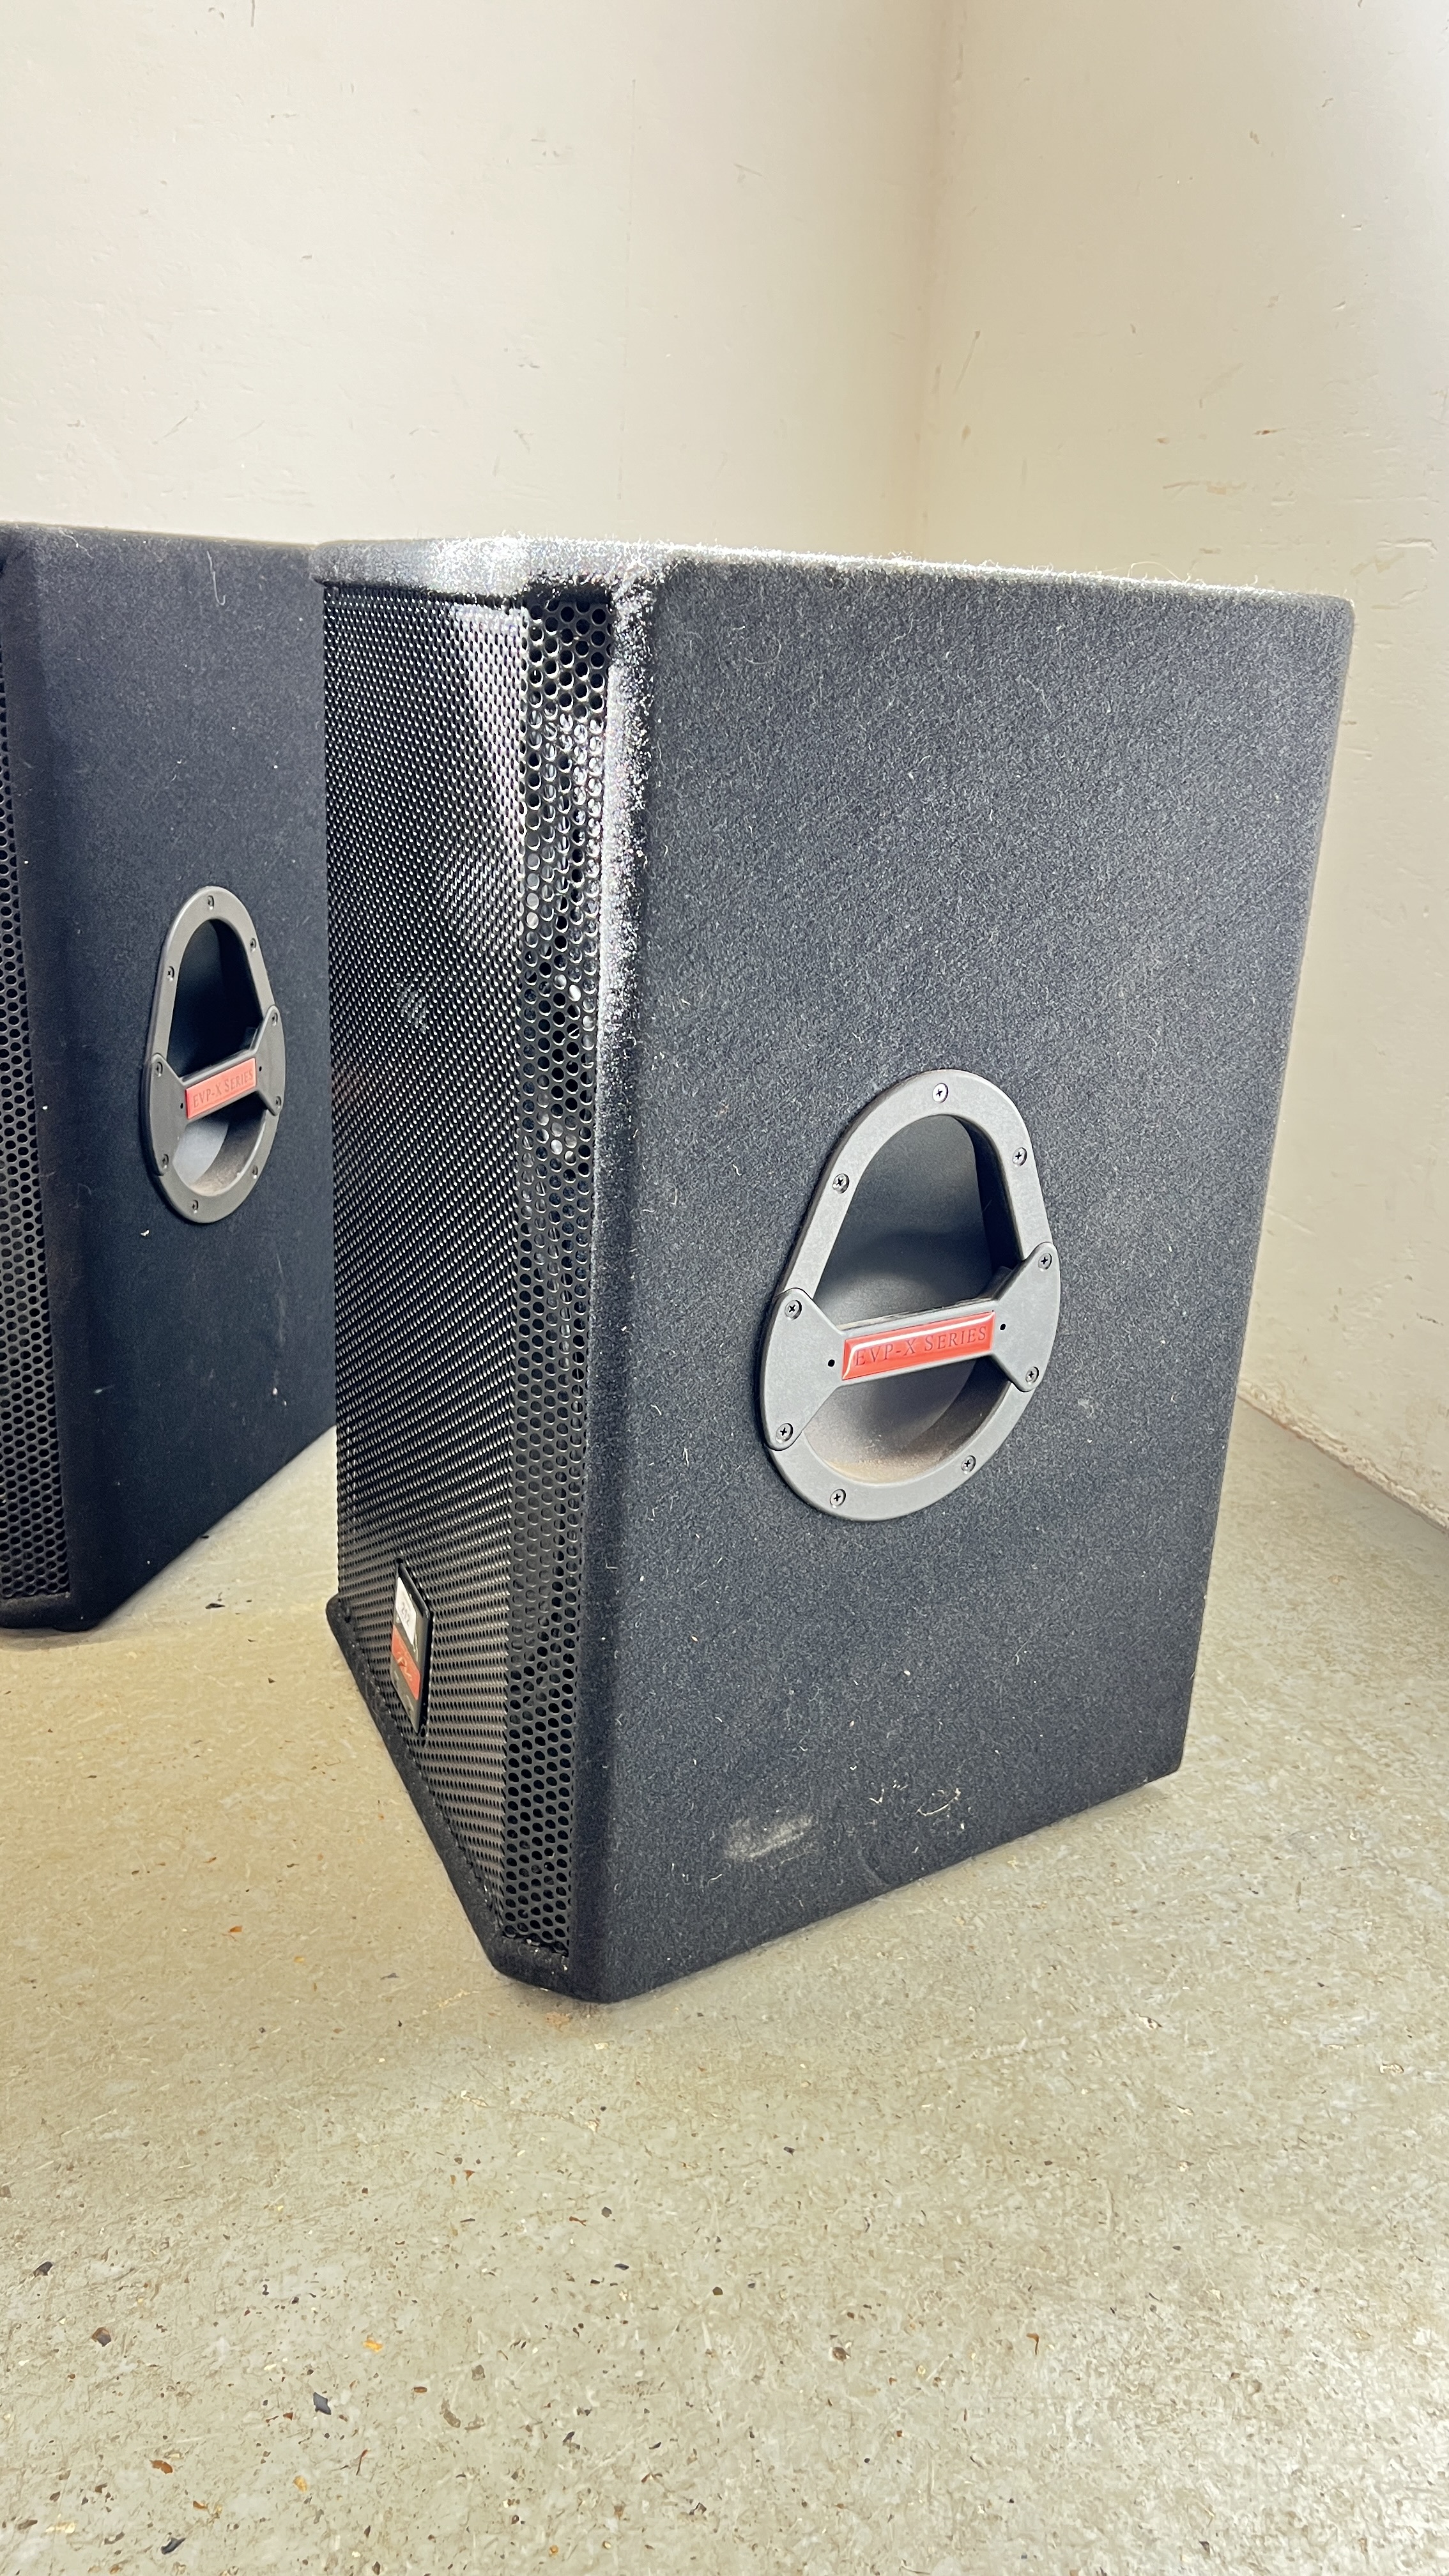 PAIR OF WHARFDALE PRO EVP-X15PA LOUD SPEAKERS PLUS PAIR OF FOLDING TRIPOD STANDS - SOLD AS SEEN - - Image 2 of 6